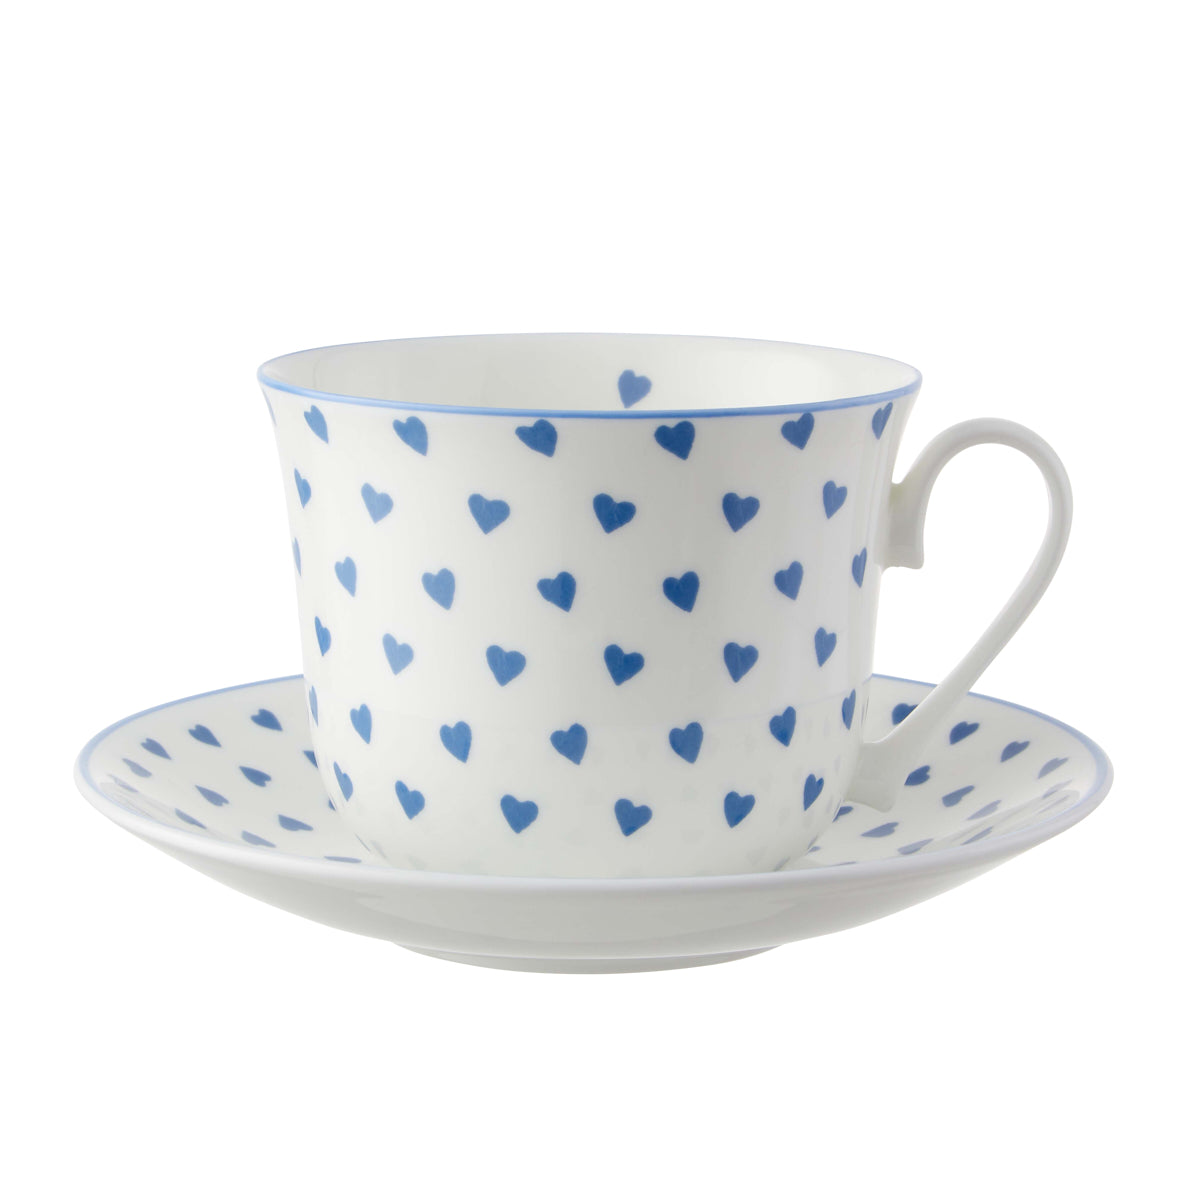 Nina Campbell Chatsworth Breakfast Cup & Saucer - Blue Heart